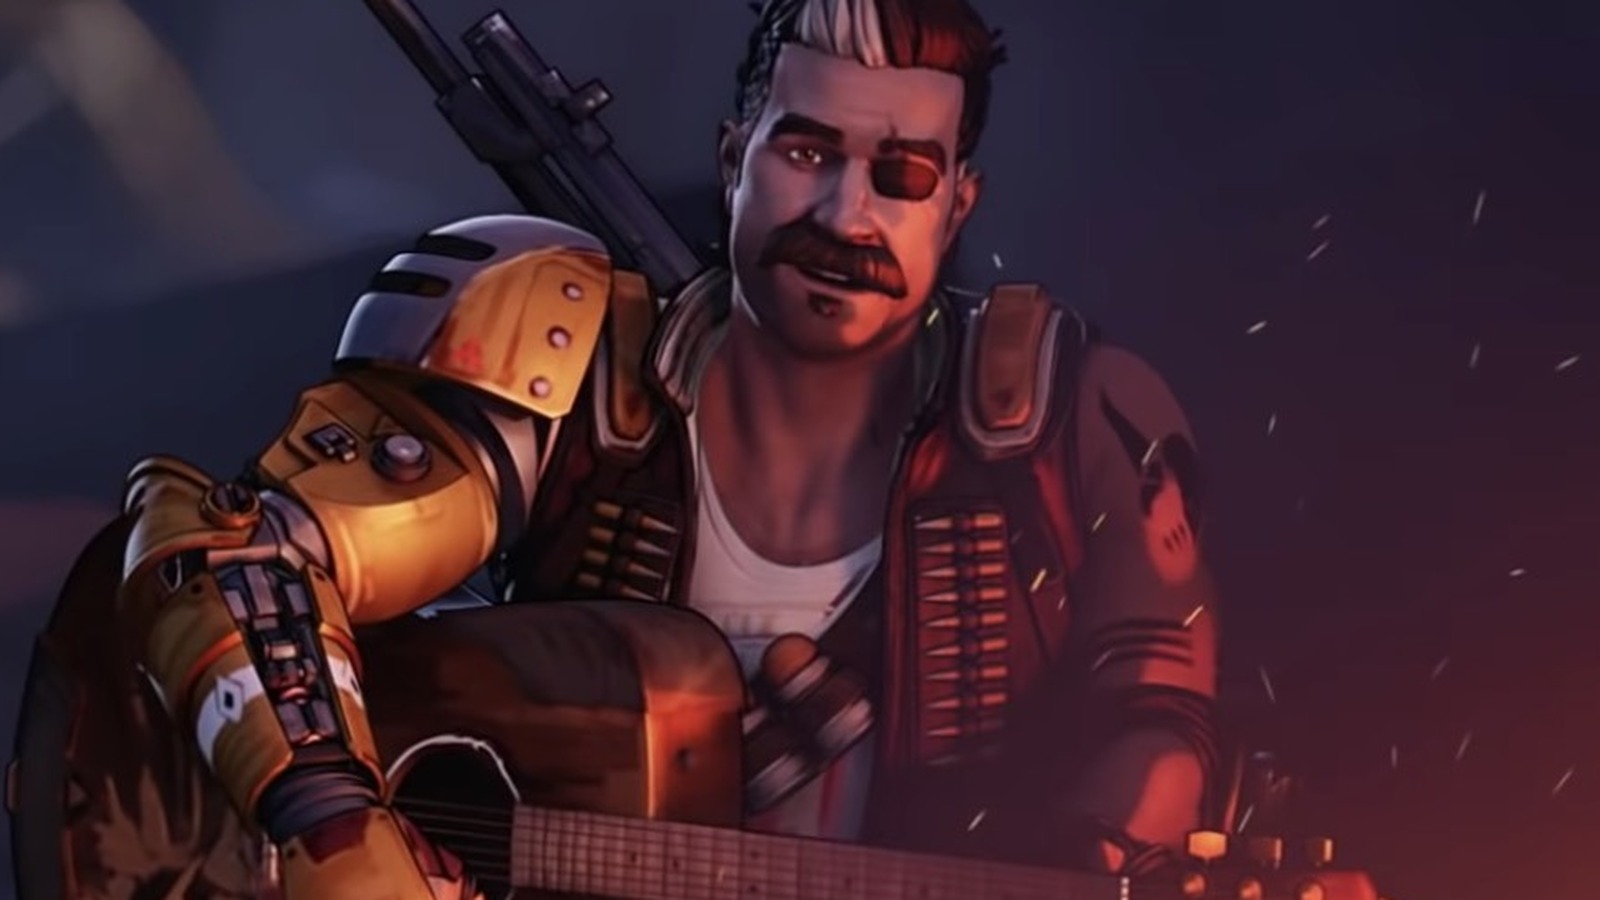 The Small Detail You Missed In The Apex Legends Season 8 Launch Trailer